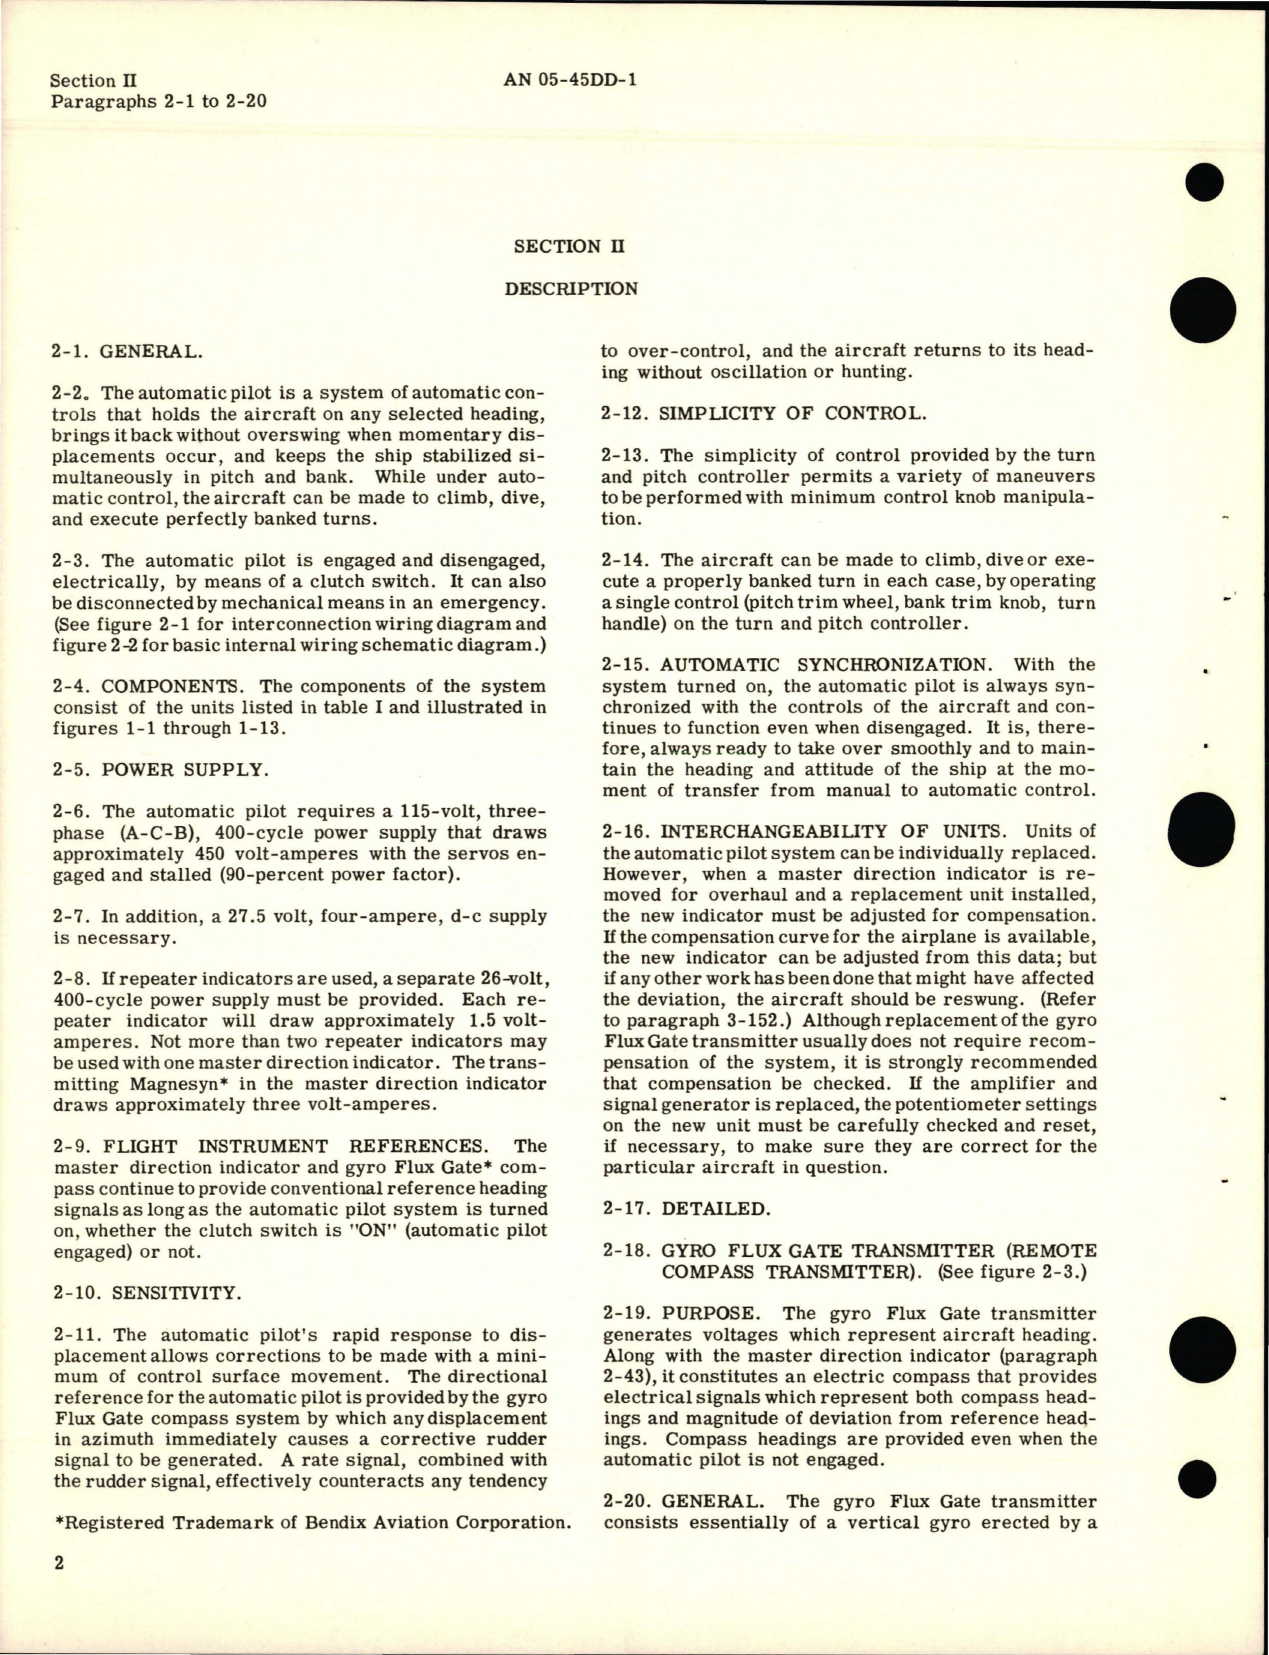 Sample page 8 from AirCorps Library document: Operation and Service Instructions for Automatic Pilot - PB-10